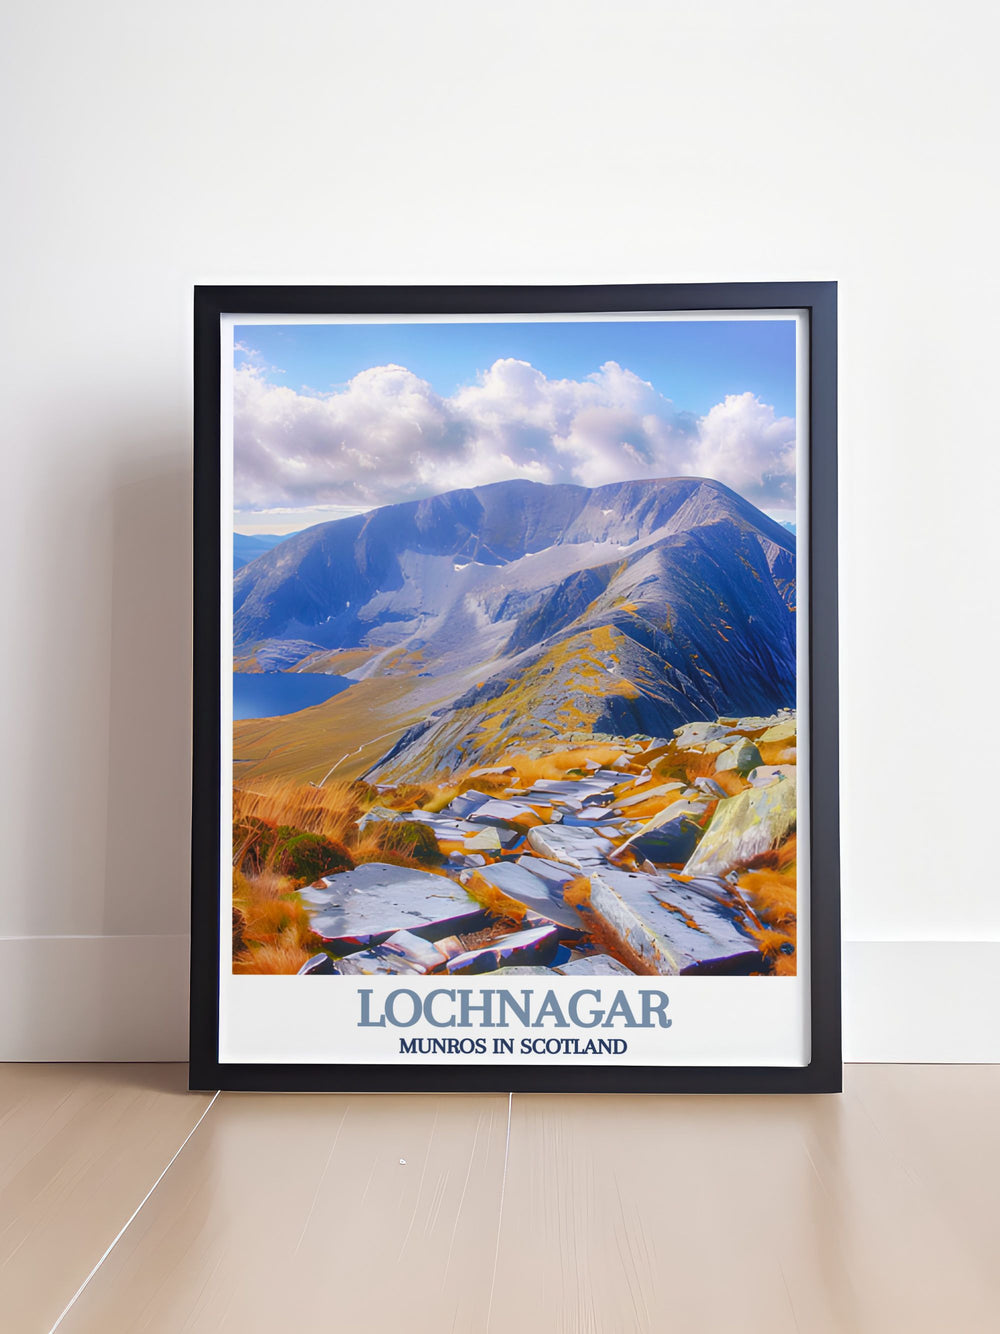 Lochnagar Summit Wall Art featuring the stunning landscapes of the Scottish Highlands with detailed vintage prints of iconic peaks such as Lochnagar Munro and Beinn Chìochan Munro ideal for adding a touch of wilderness to any living space